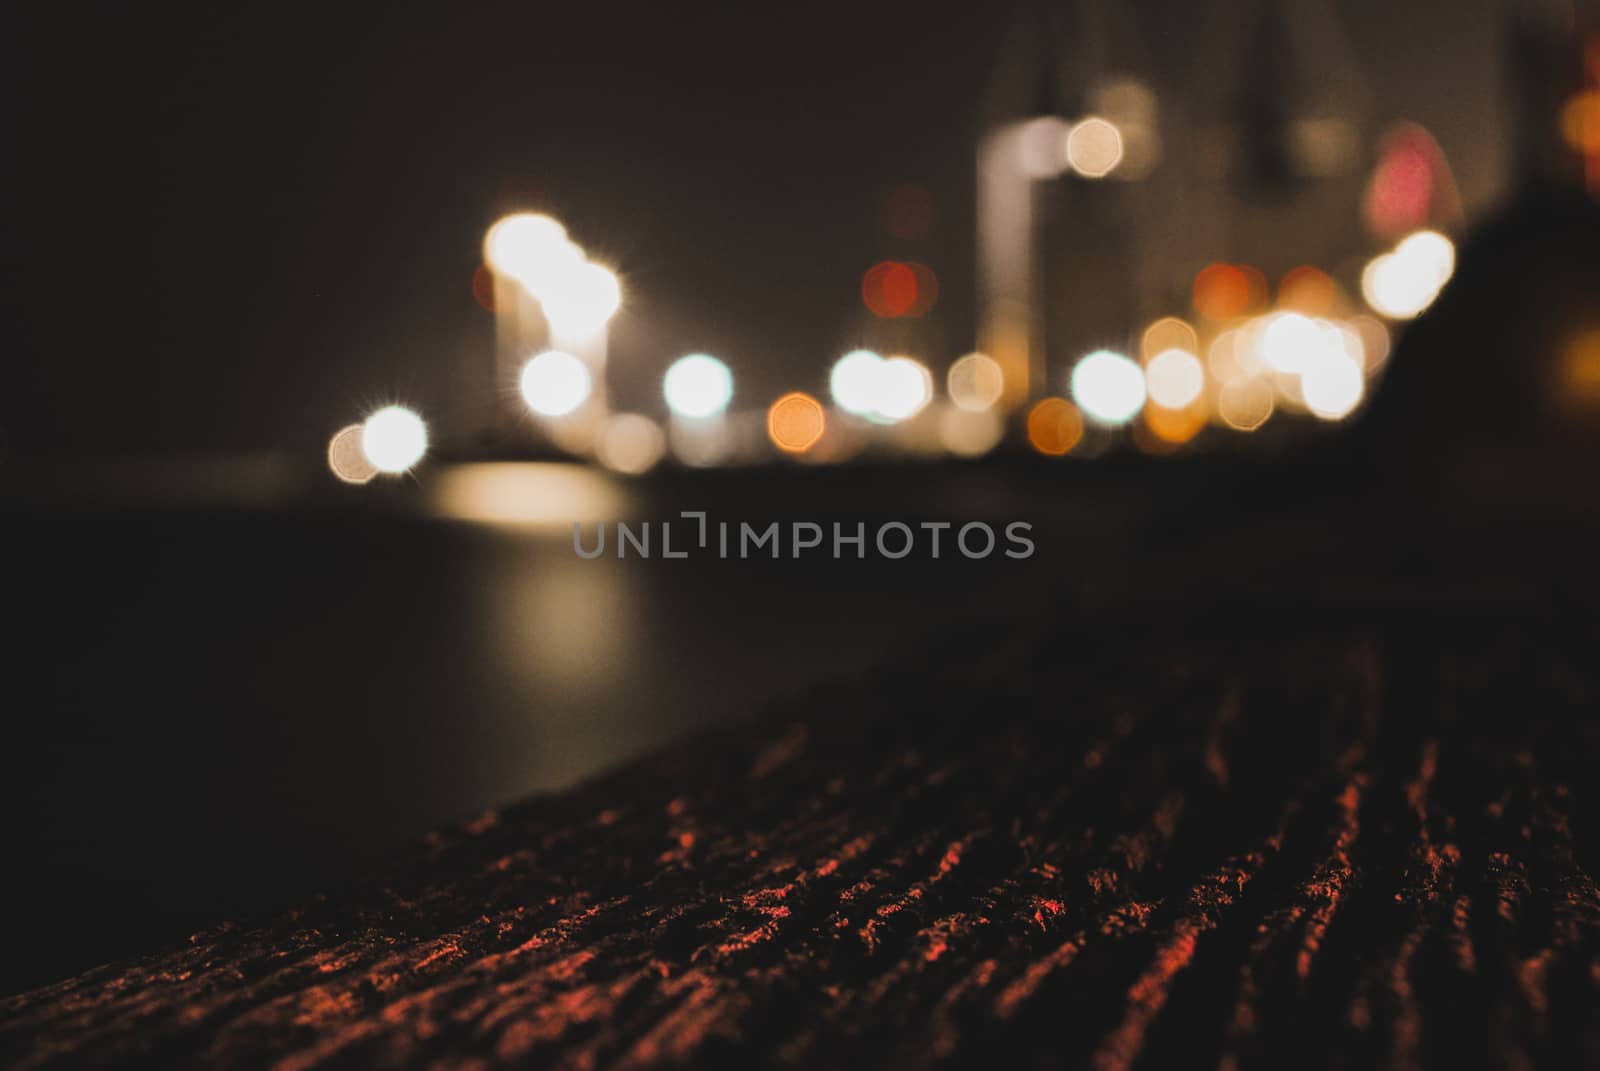 A blurry scenery of a harbour at night